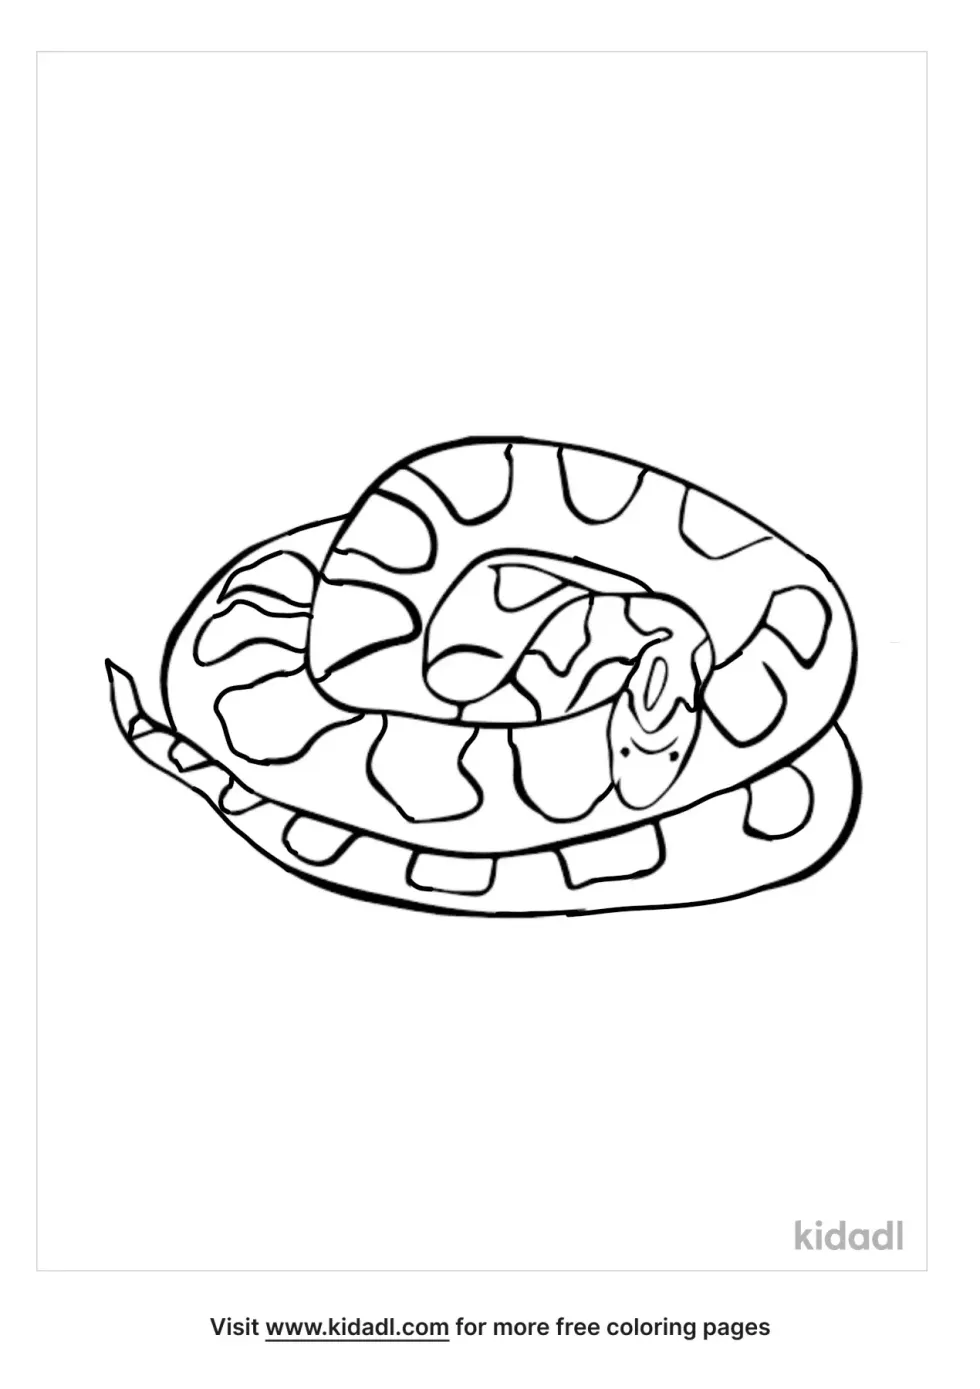 Buttermilk Racer Snake Coloring Page